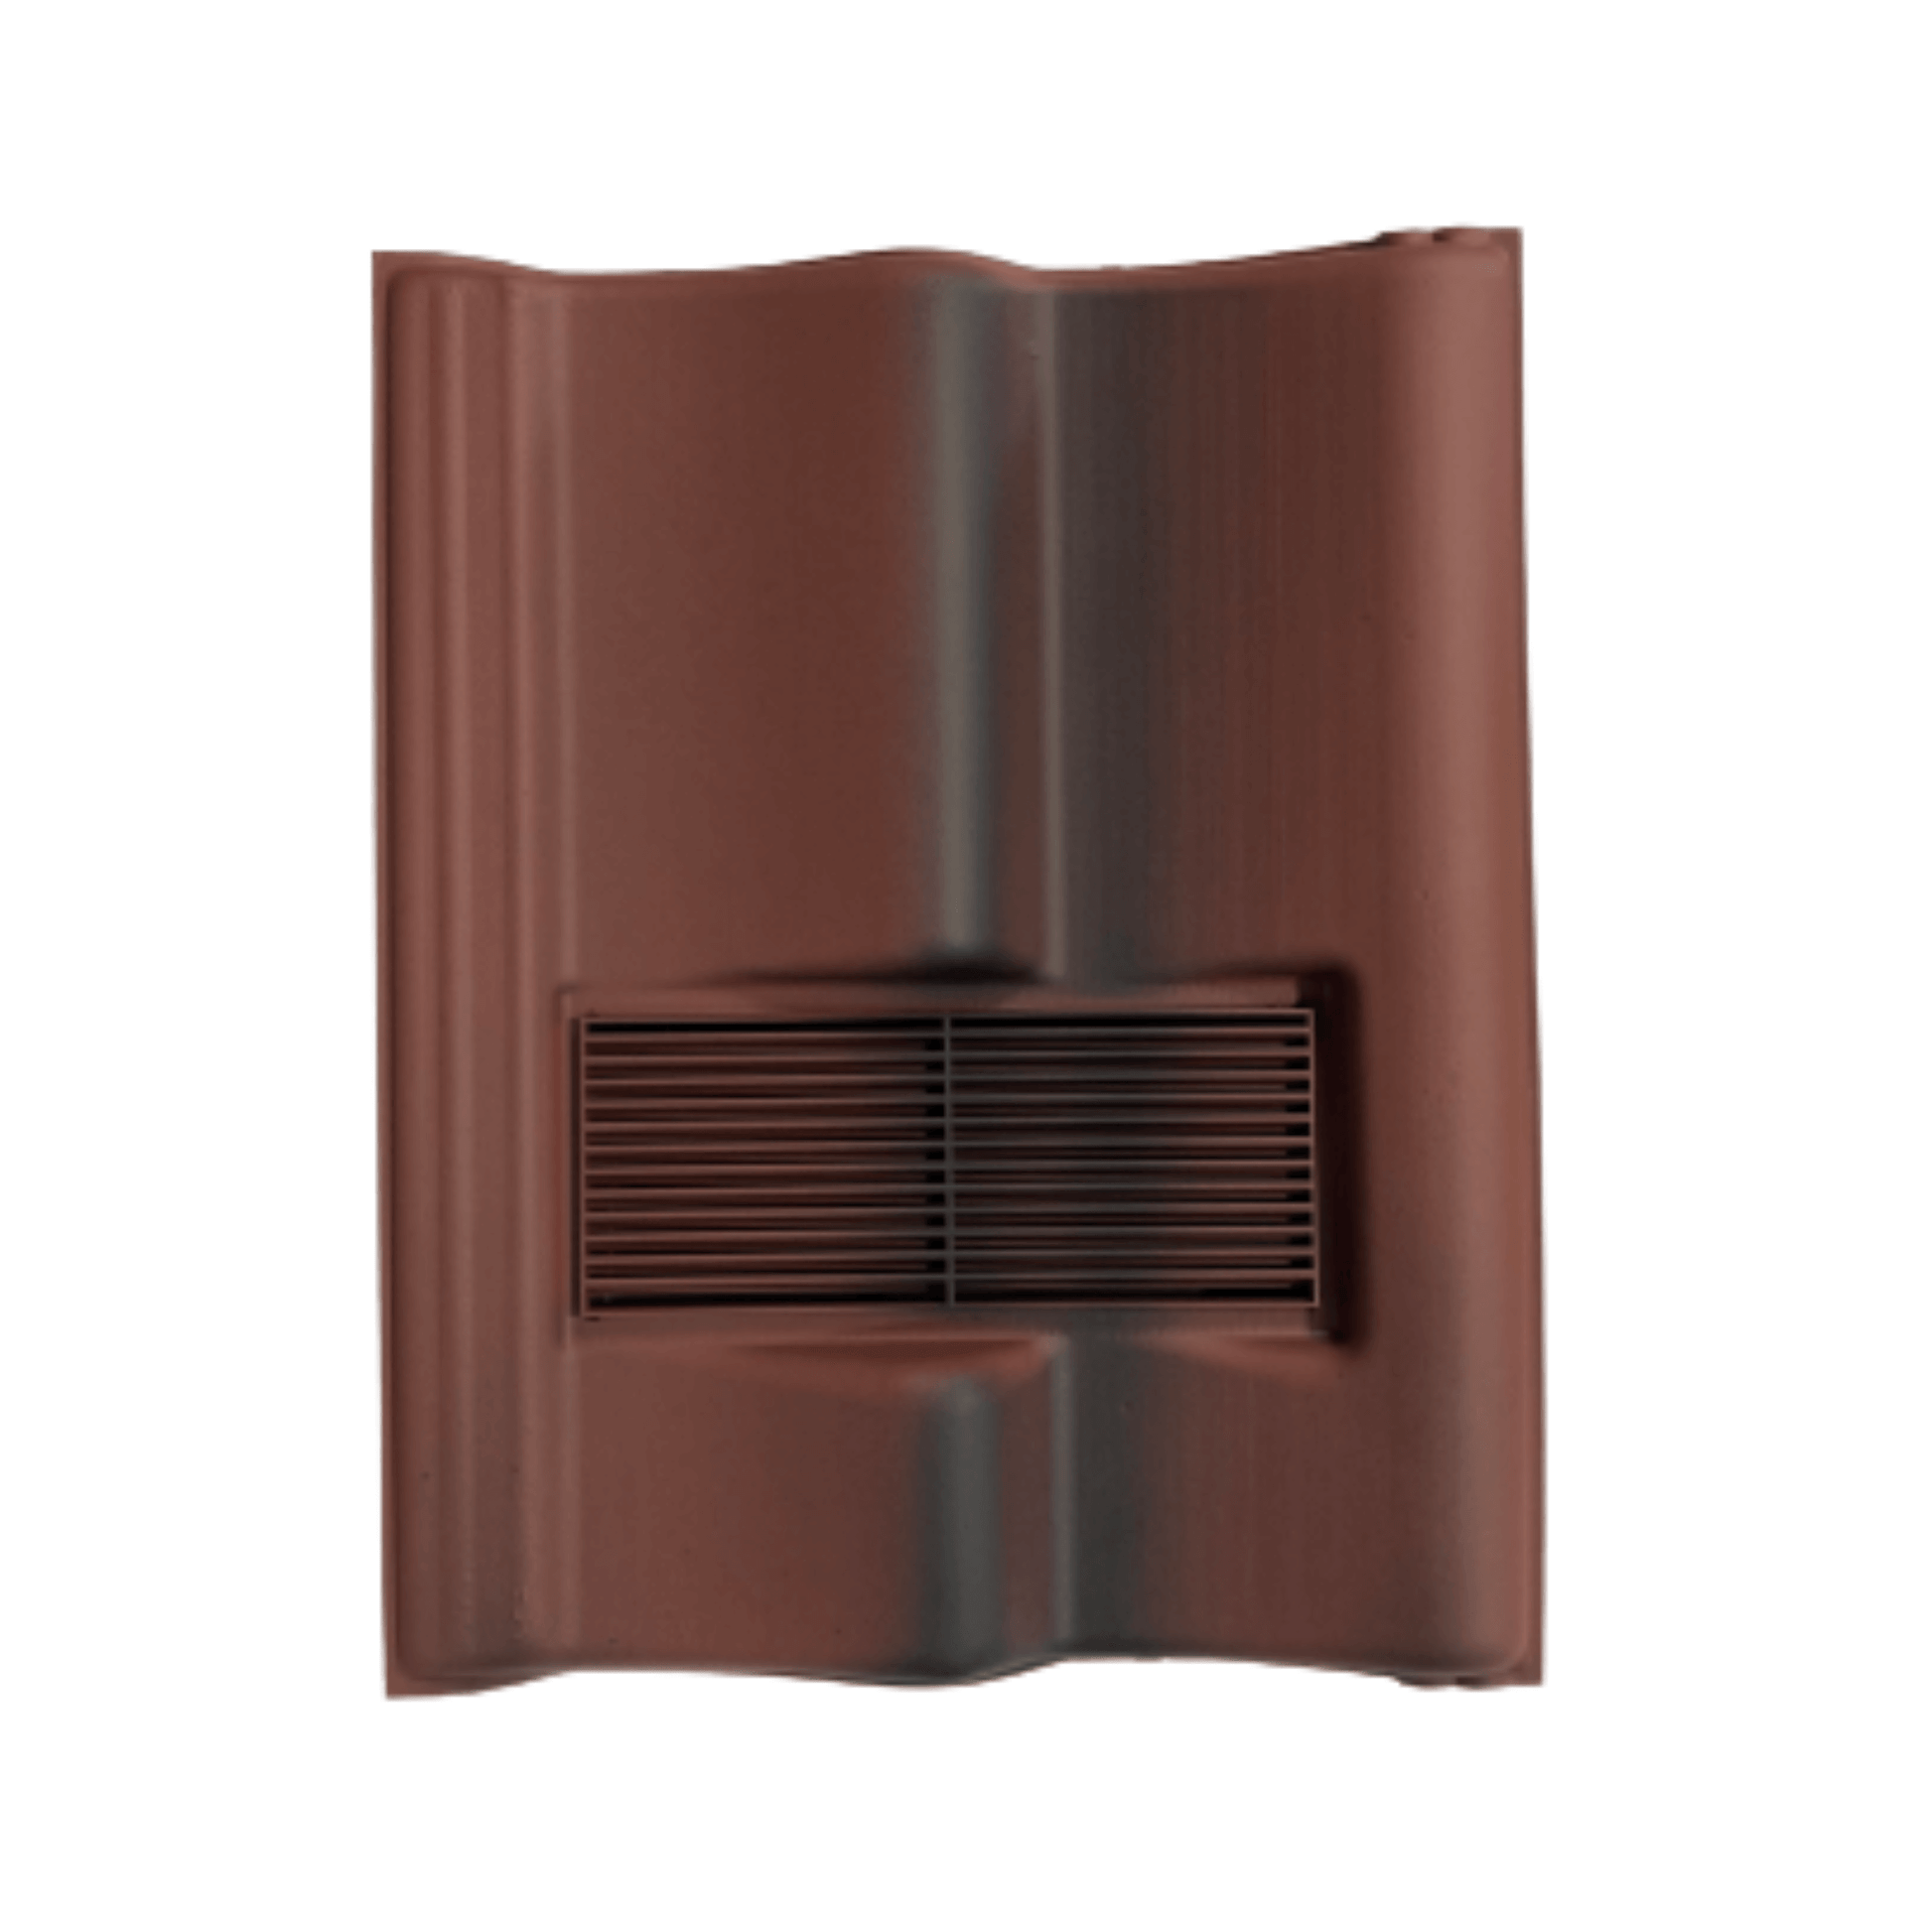 Redland Grovebury Vent Tile Rustic Red Smooth - Beddoes Products